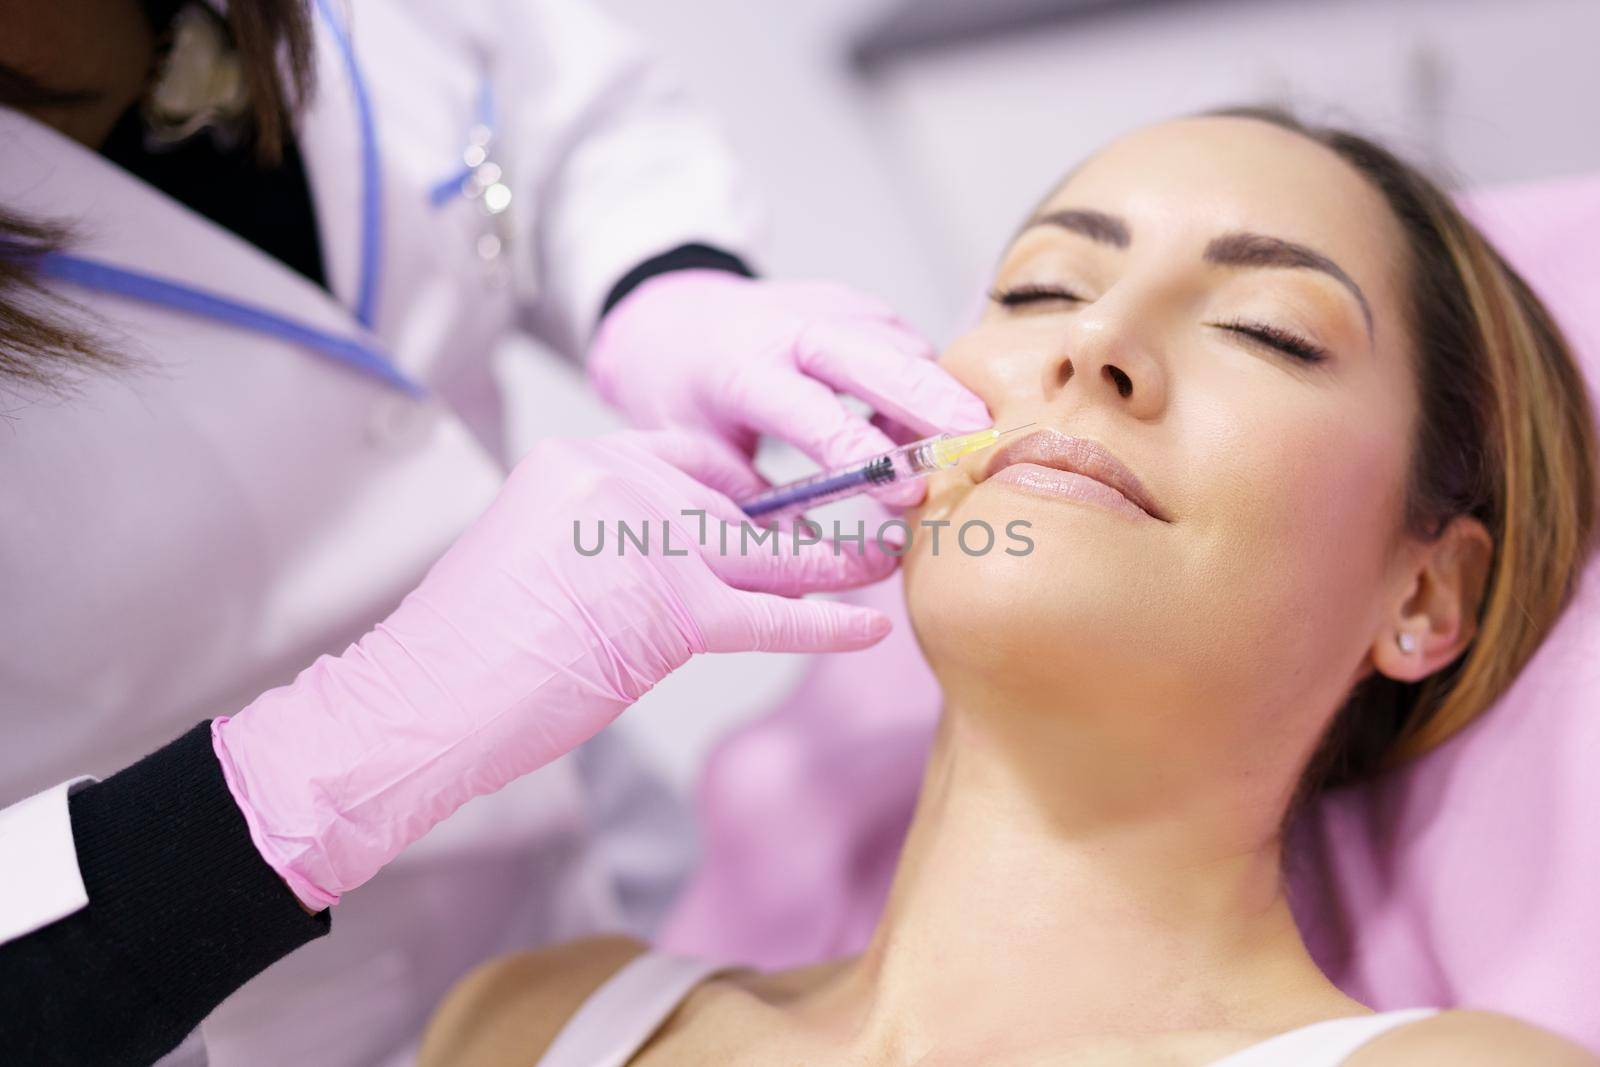 Doctor injecting hyaluronic acid into the mustache area of a middle-aged woman as a facial rejuvenation treatment.